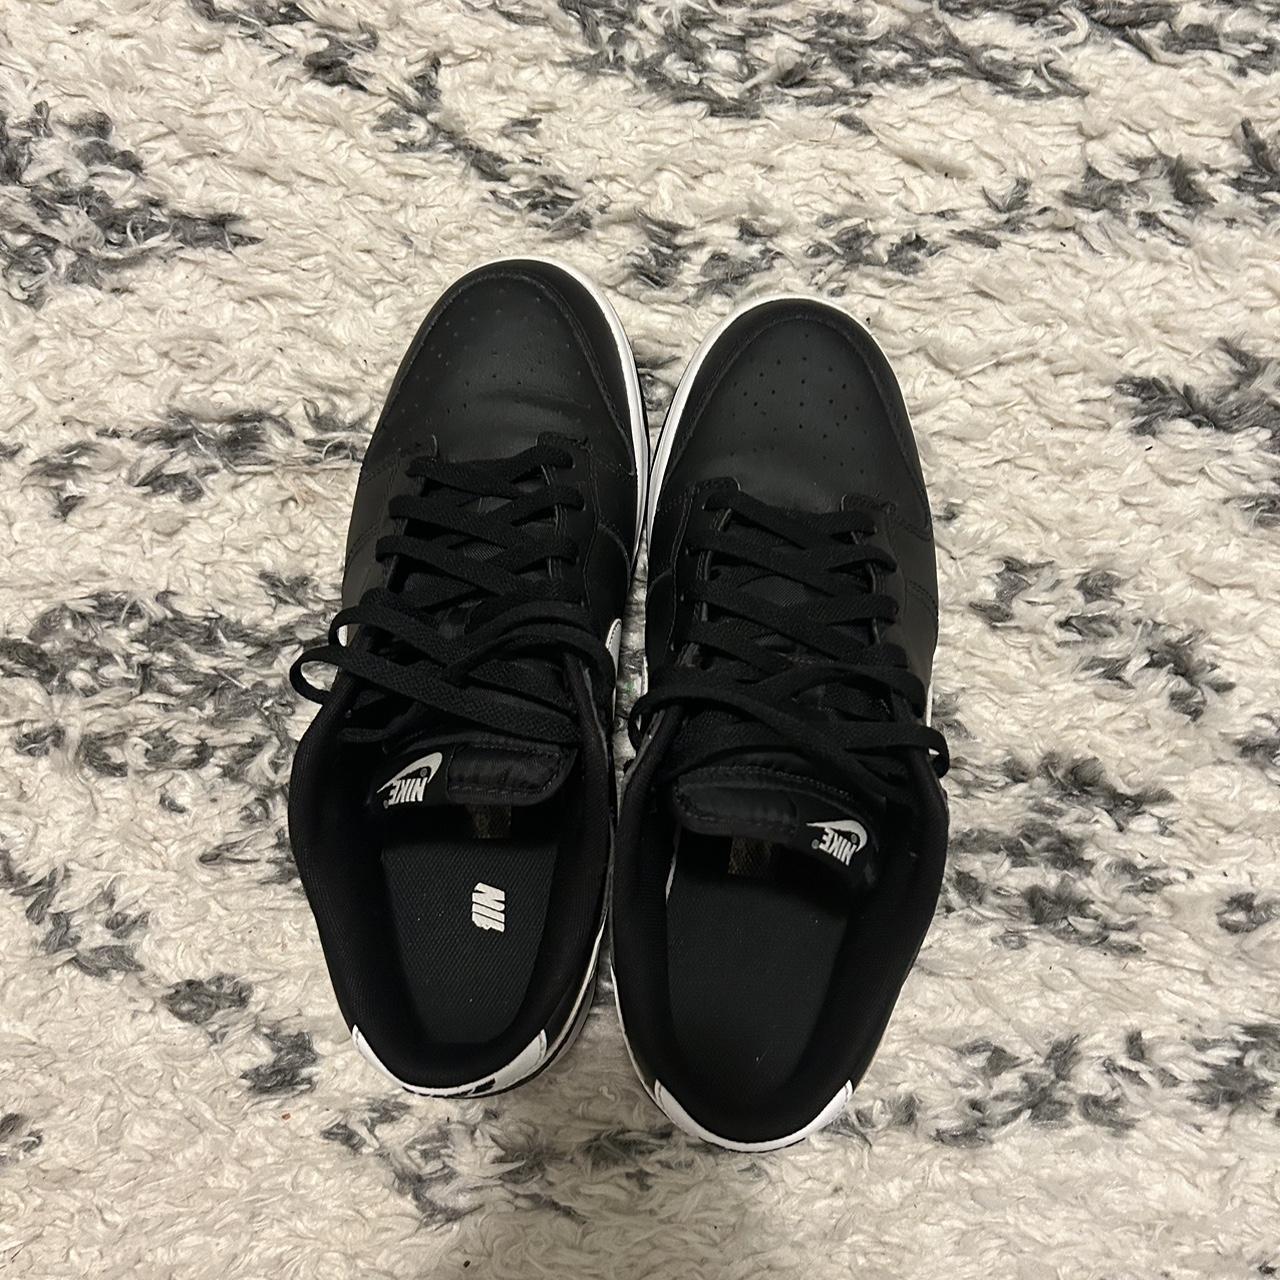 Nike Men's Black and White Trainers